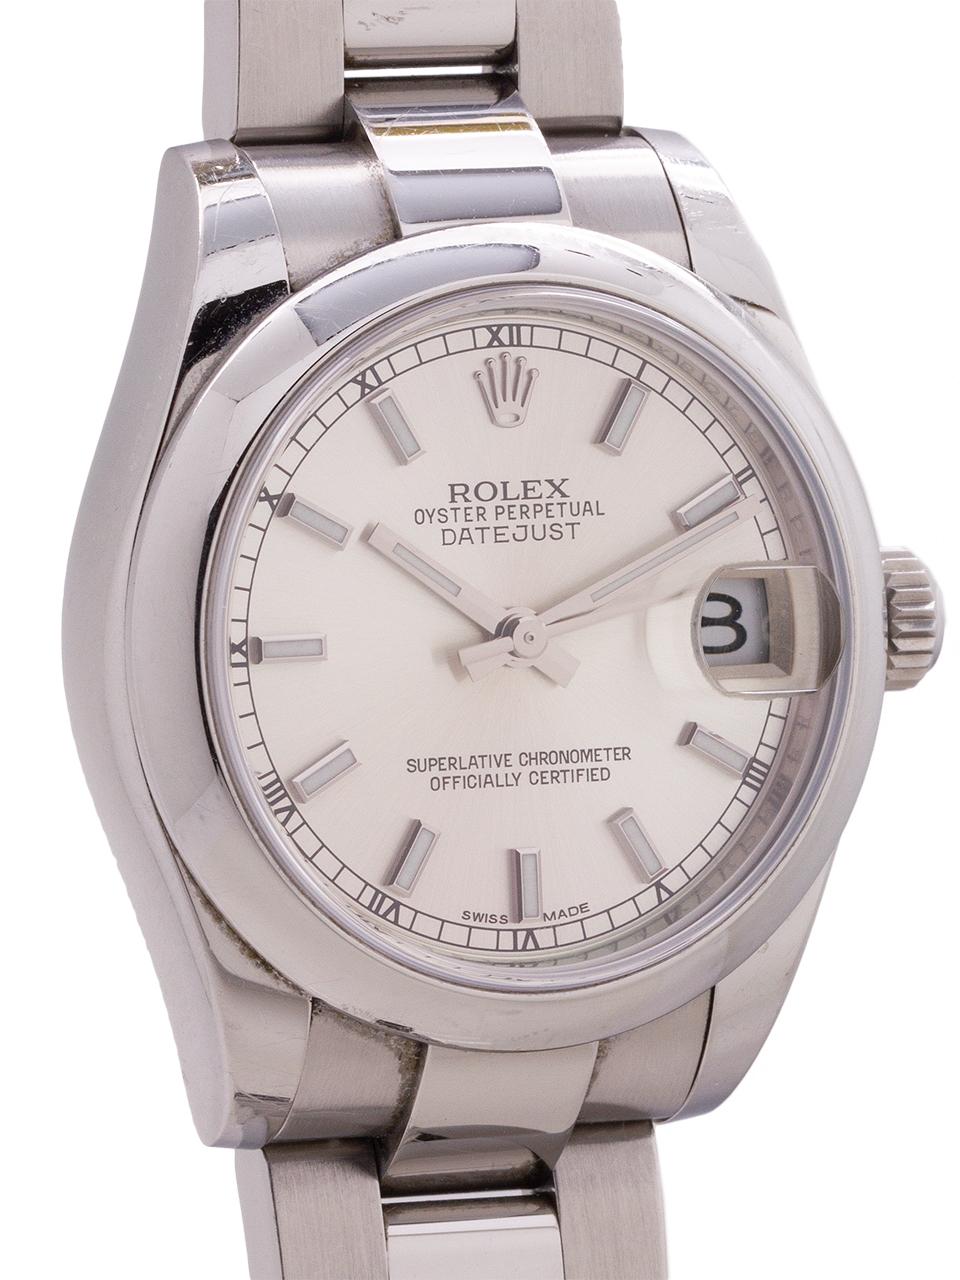 Man/s midsize Rolex stainless steel Datejust ref# 178240 circa 2015 complete with box and papers. Featuring  31mm diameter midsize case with smooth domed bezel and sapphire crystal, original silvered dial with new style wide luminous stick indexes.